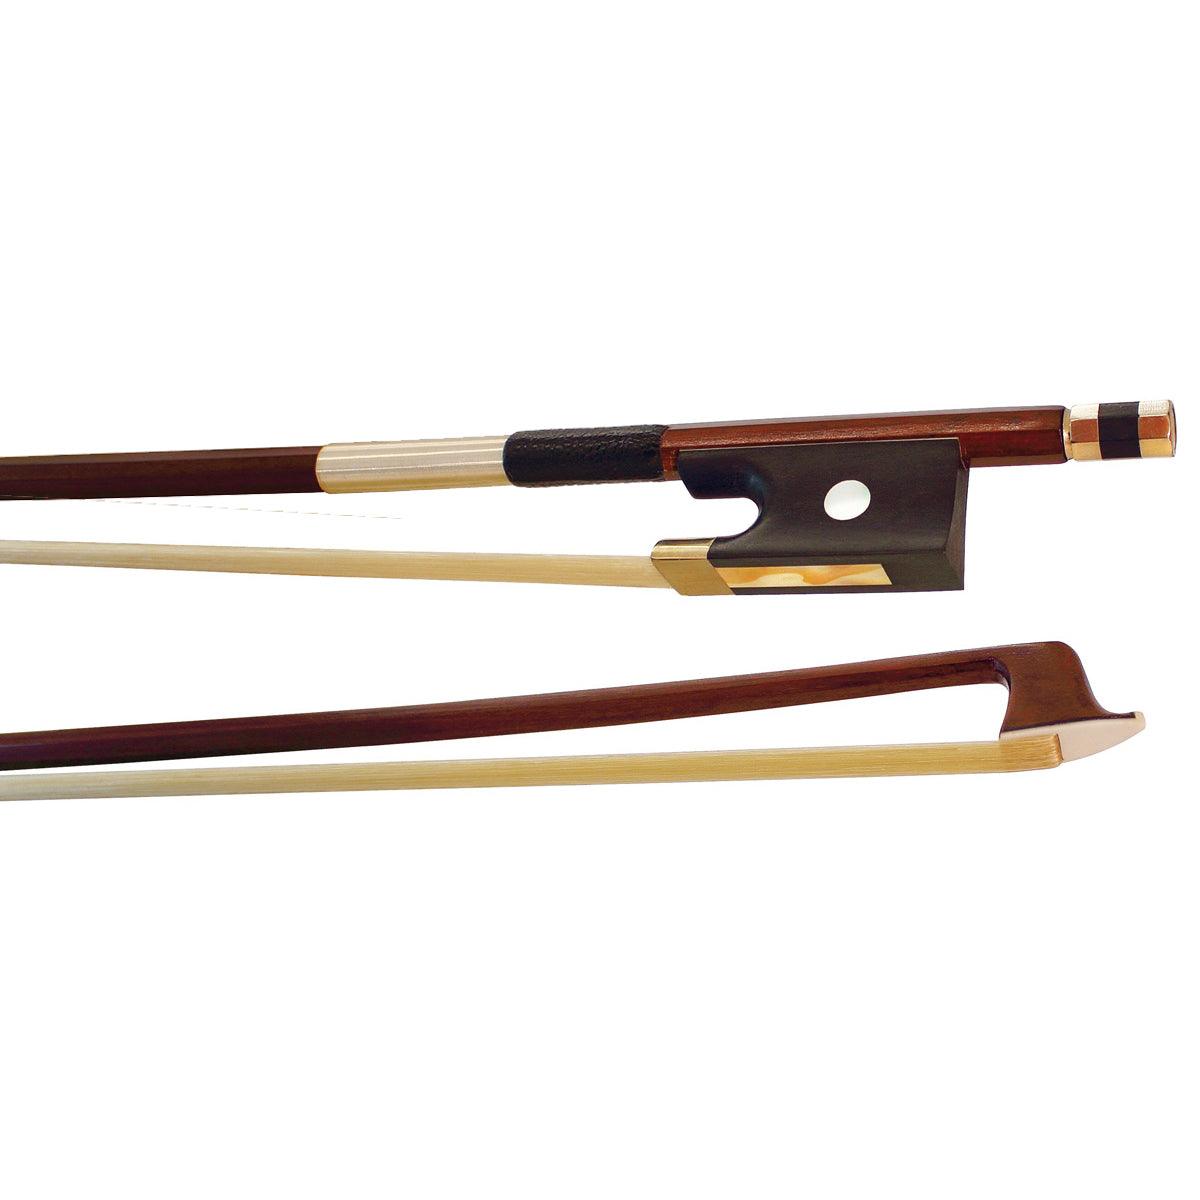 Vivo 4/4 Student Violin Bow - Orchestral - Strings - Accessories by Vivo at Muso's Stuff